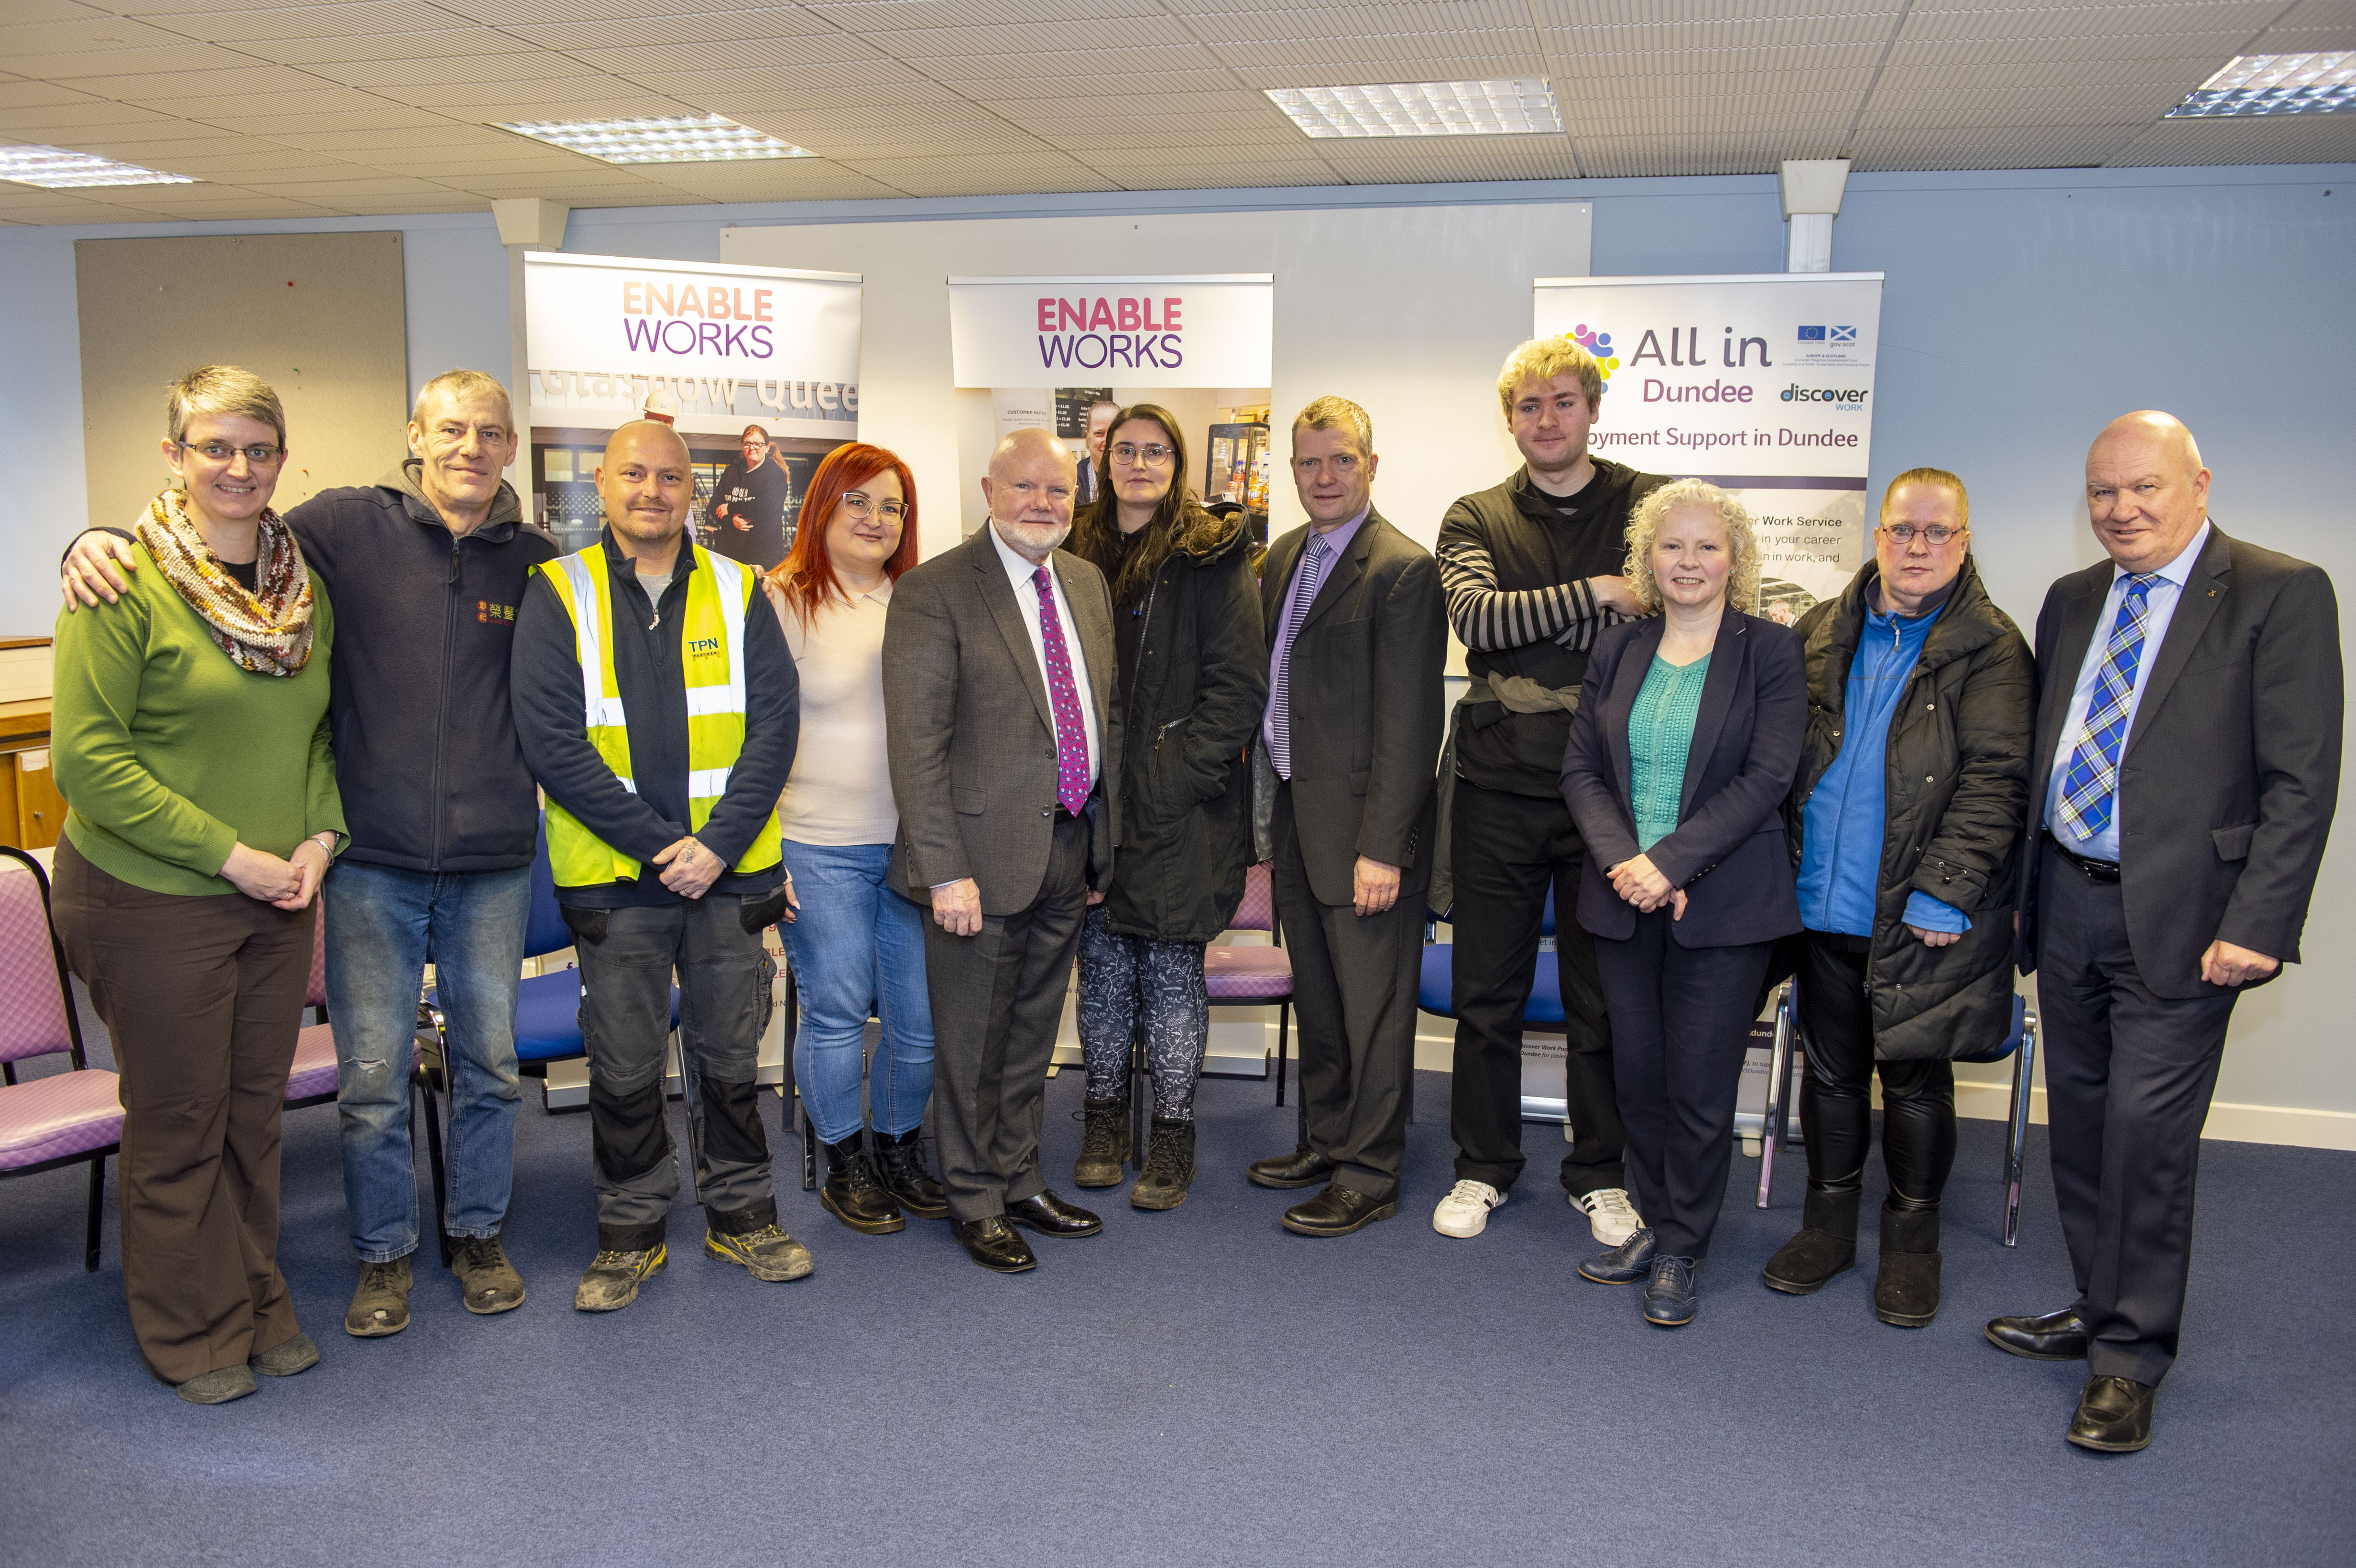 This image shows members of the Committee with clients from ENABLE Works